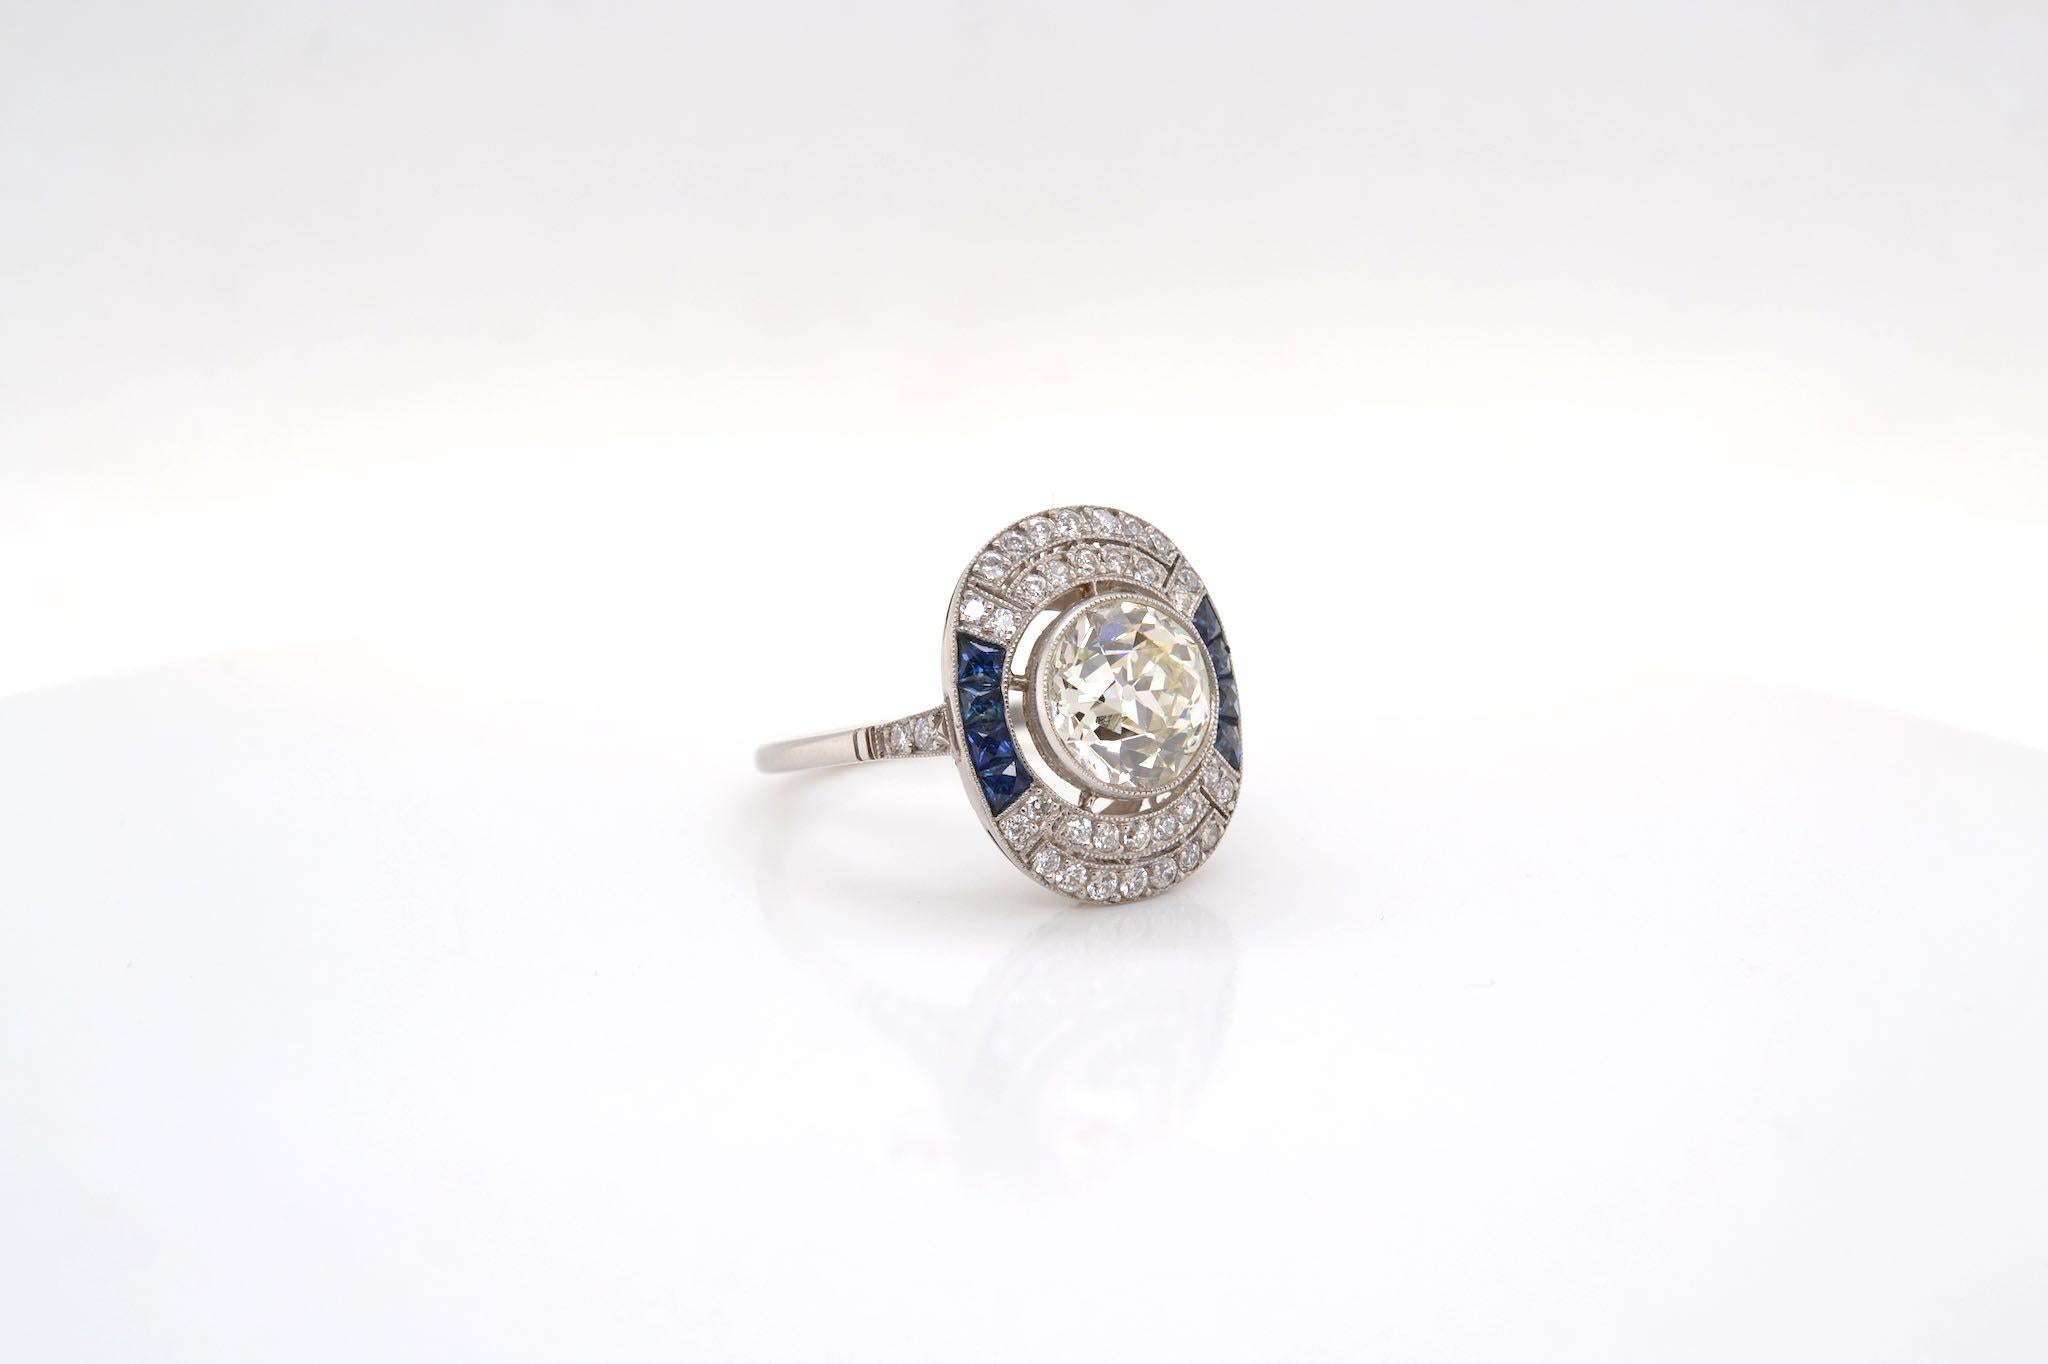 Stones: Old cut diamond of 2.55 carats L/M-Si,
diamond paving for a total weight of 0.35 carat and calibrated sapphires.
Material: Platinum
Dimensions: 18 mm length on finger
Weight: 5.5g
Size: 57 (free sizing)
Certificate
Ref. : 24080
​